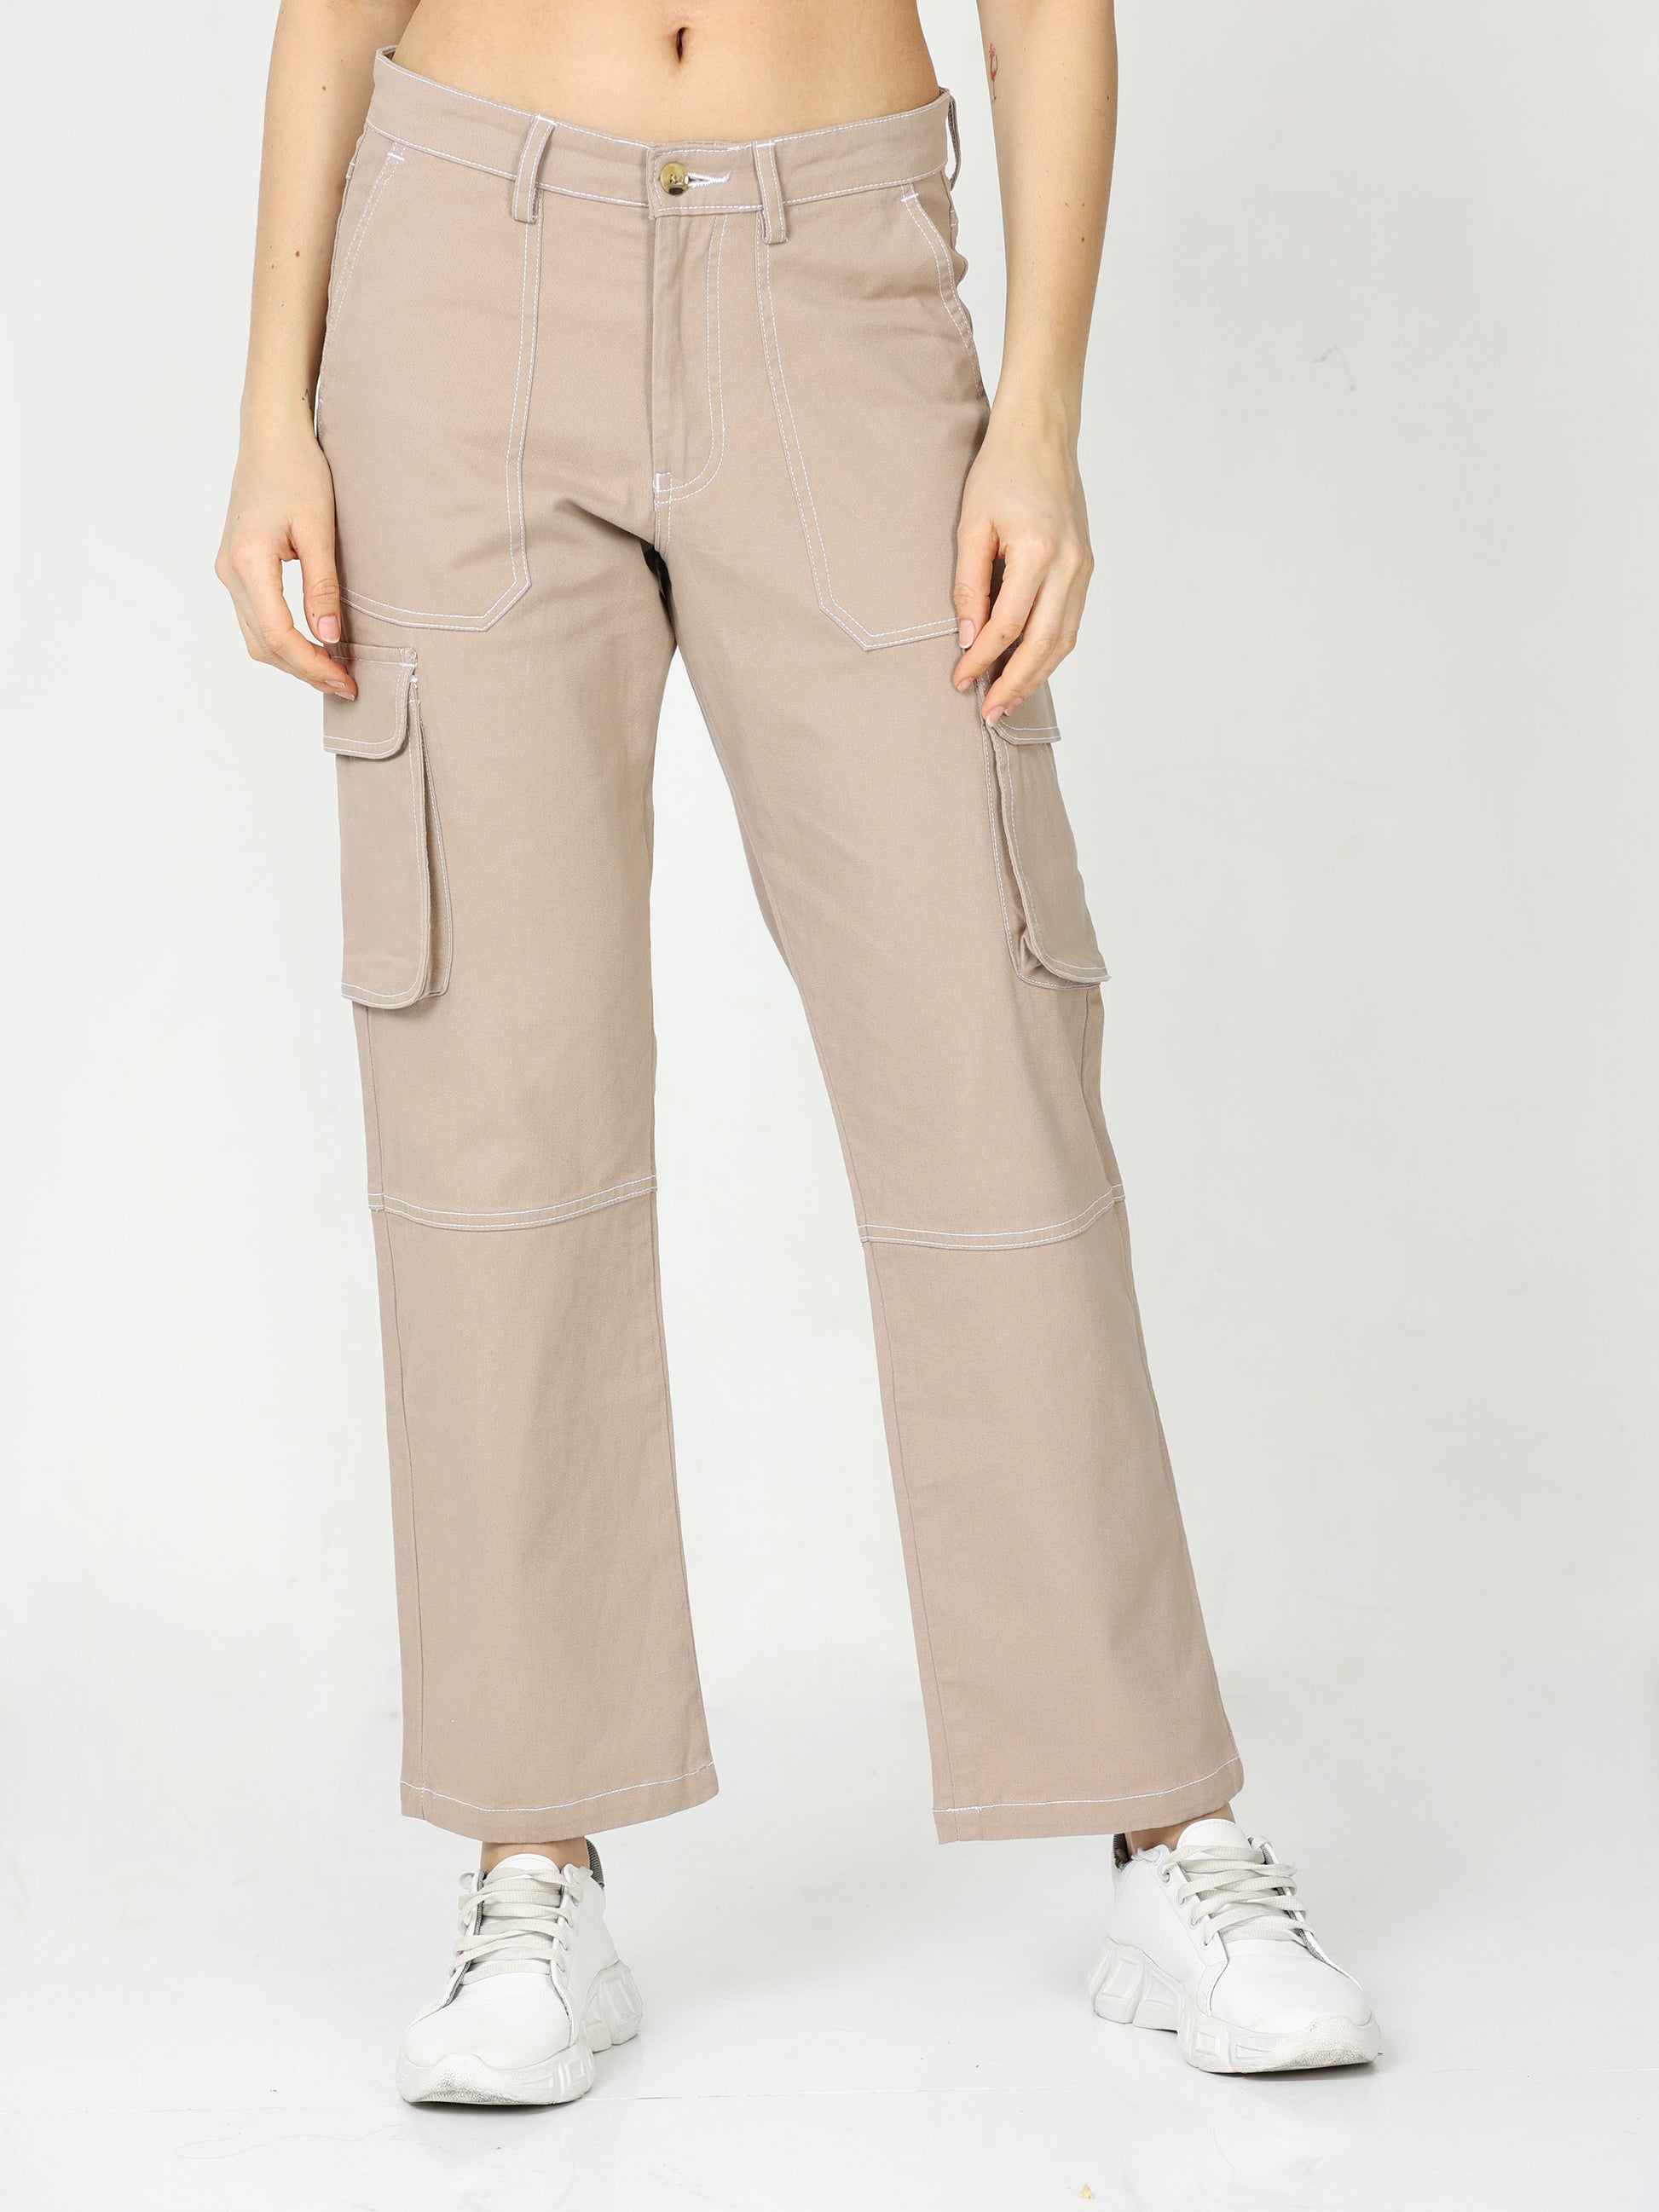 Buy cool and comfortable khaki cargo pants for women – Marquee